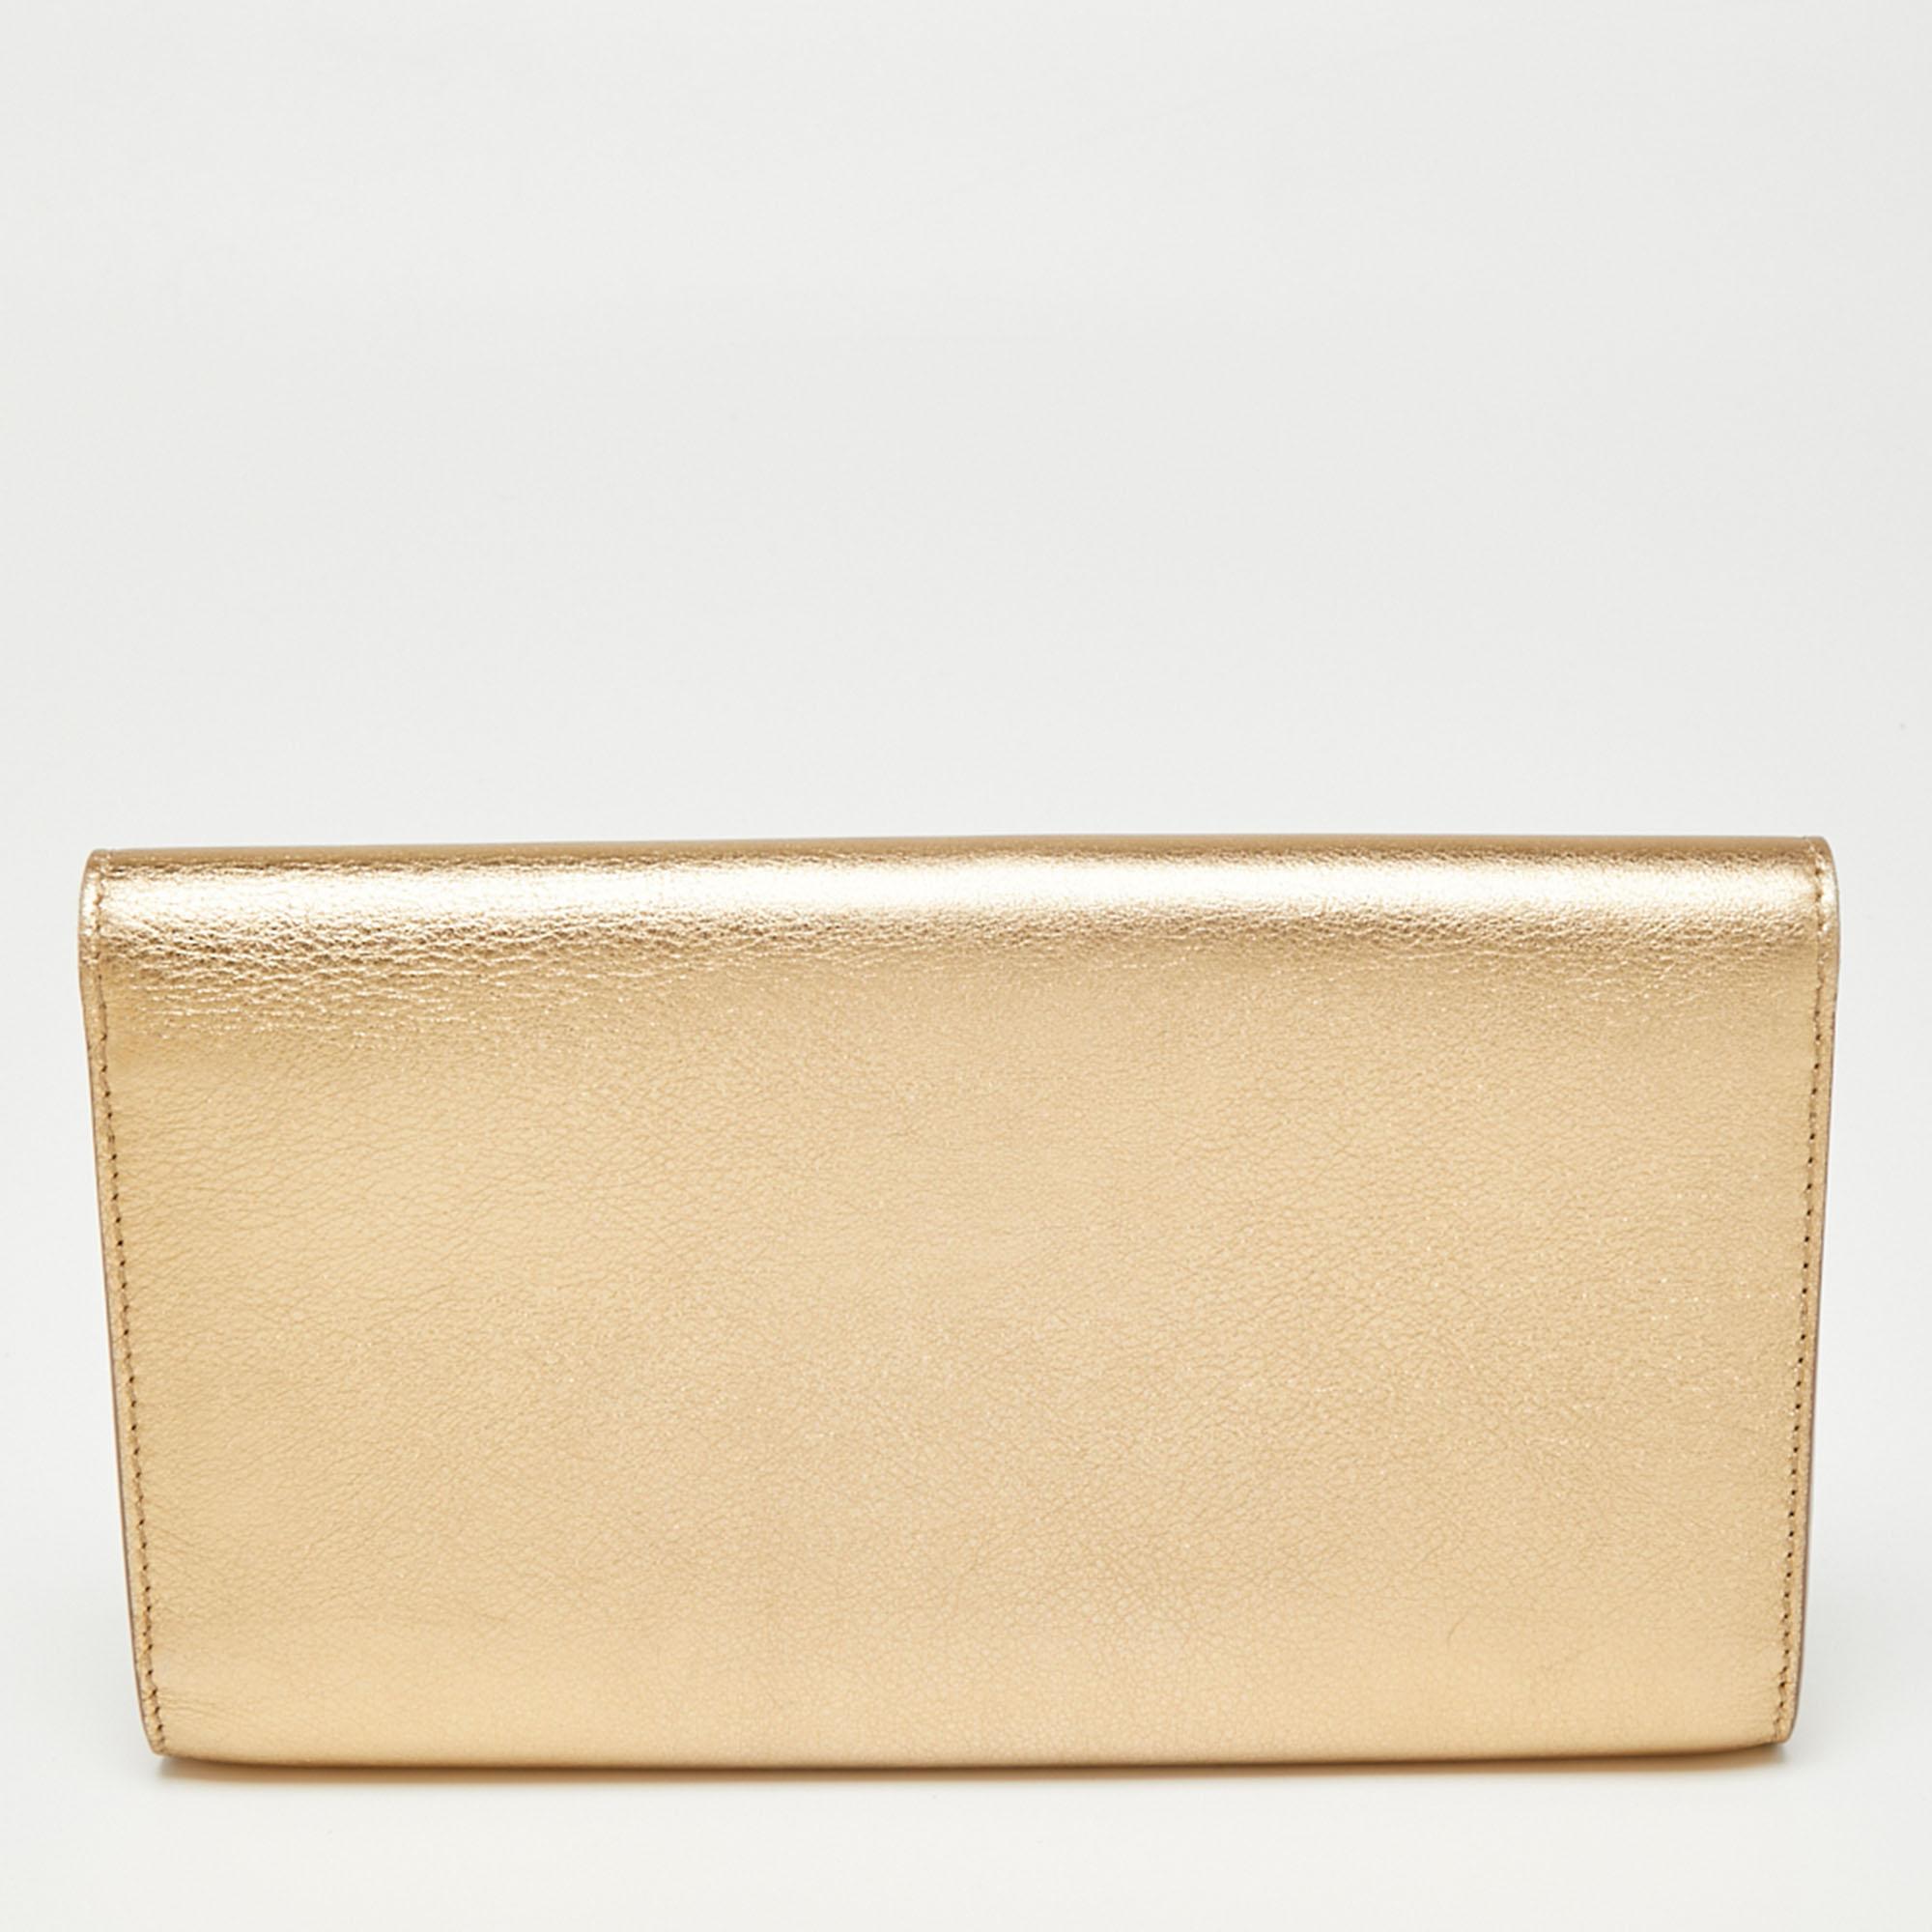 How stunning is this Louise clutch by Louis Vuitton! It is glossy, well-crafted, and overflowing with style. It has a metallic gold leather exterior, an Alcantara interior, and a large LV logo adorned on the flap. This creation will elevate your